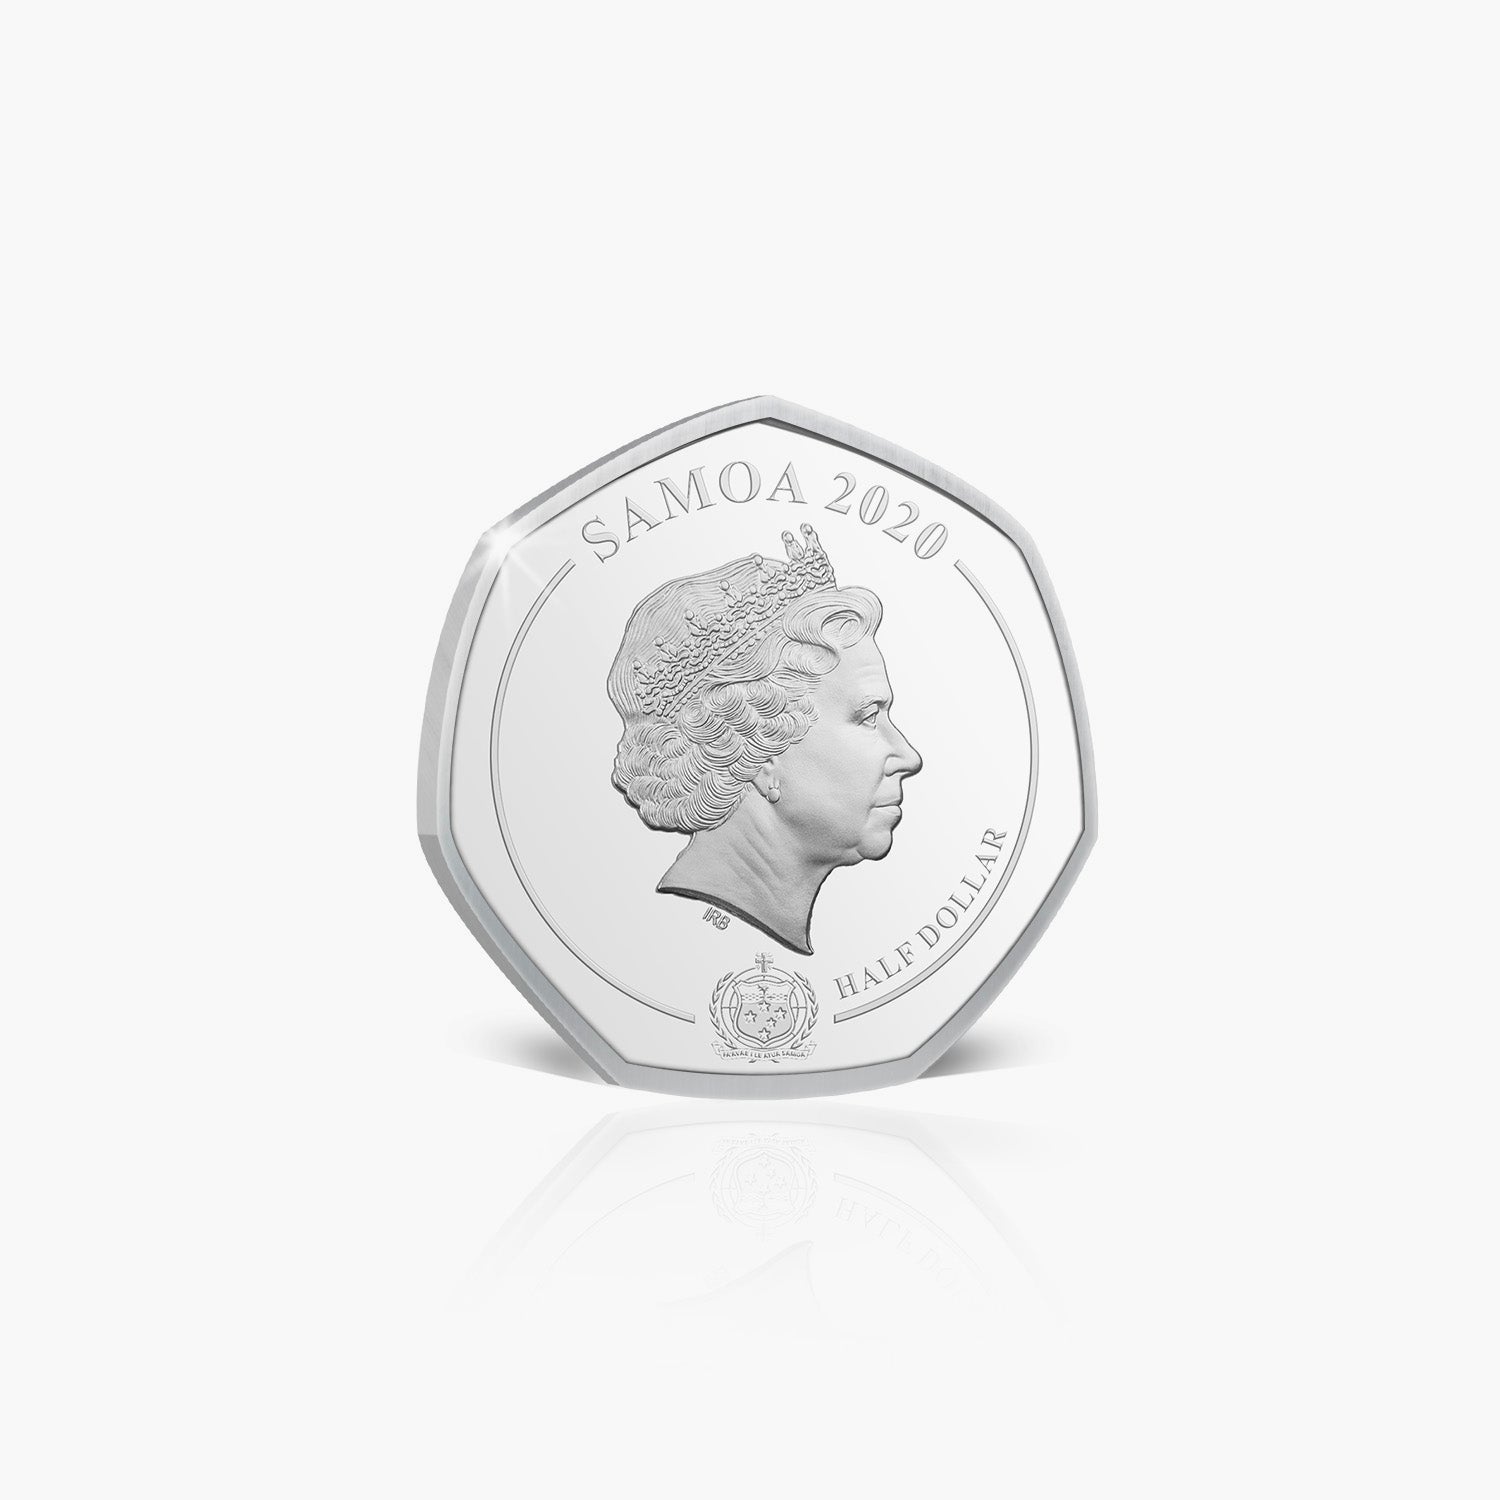 Food Supply Chain Silver Plated Coin